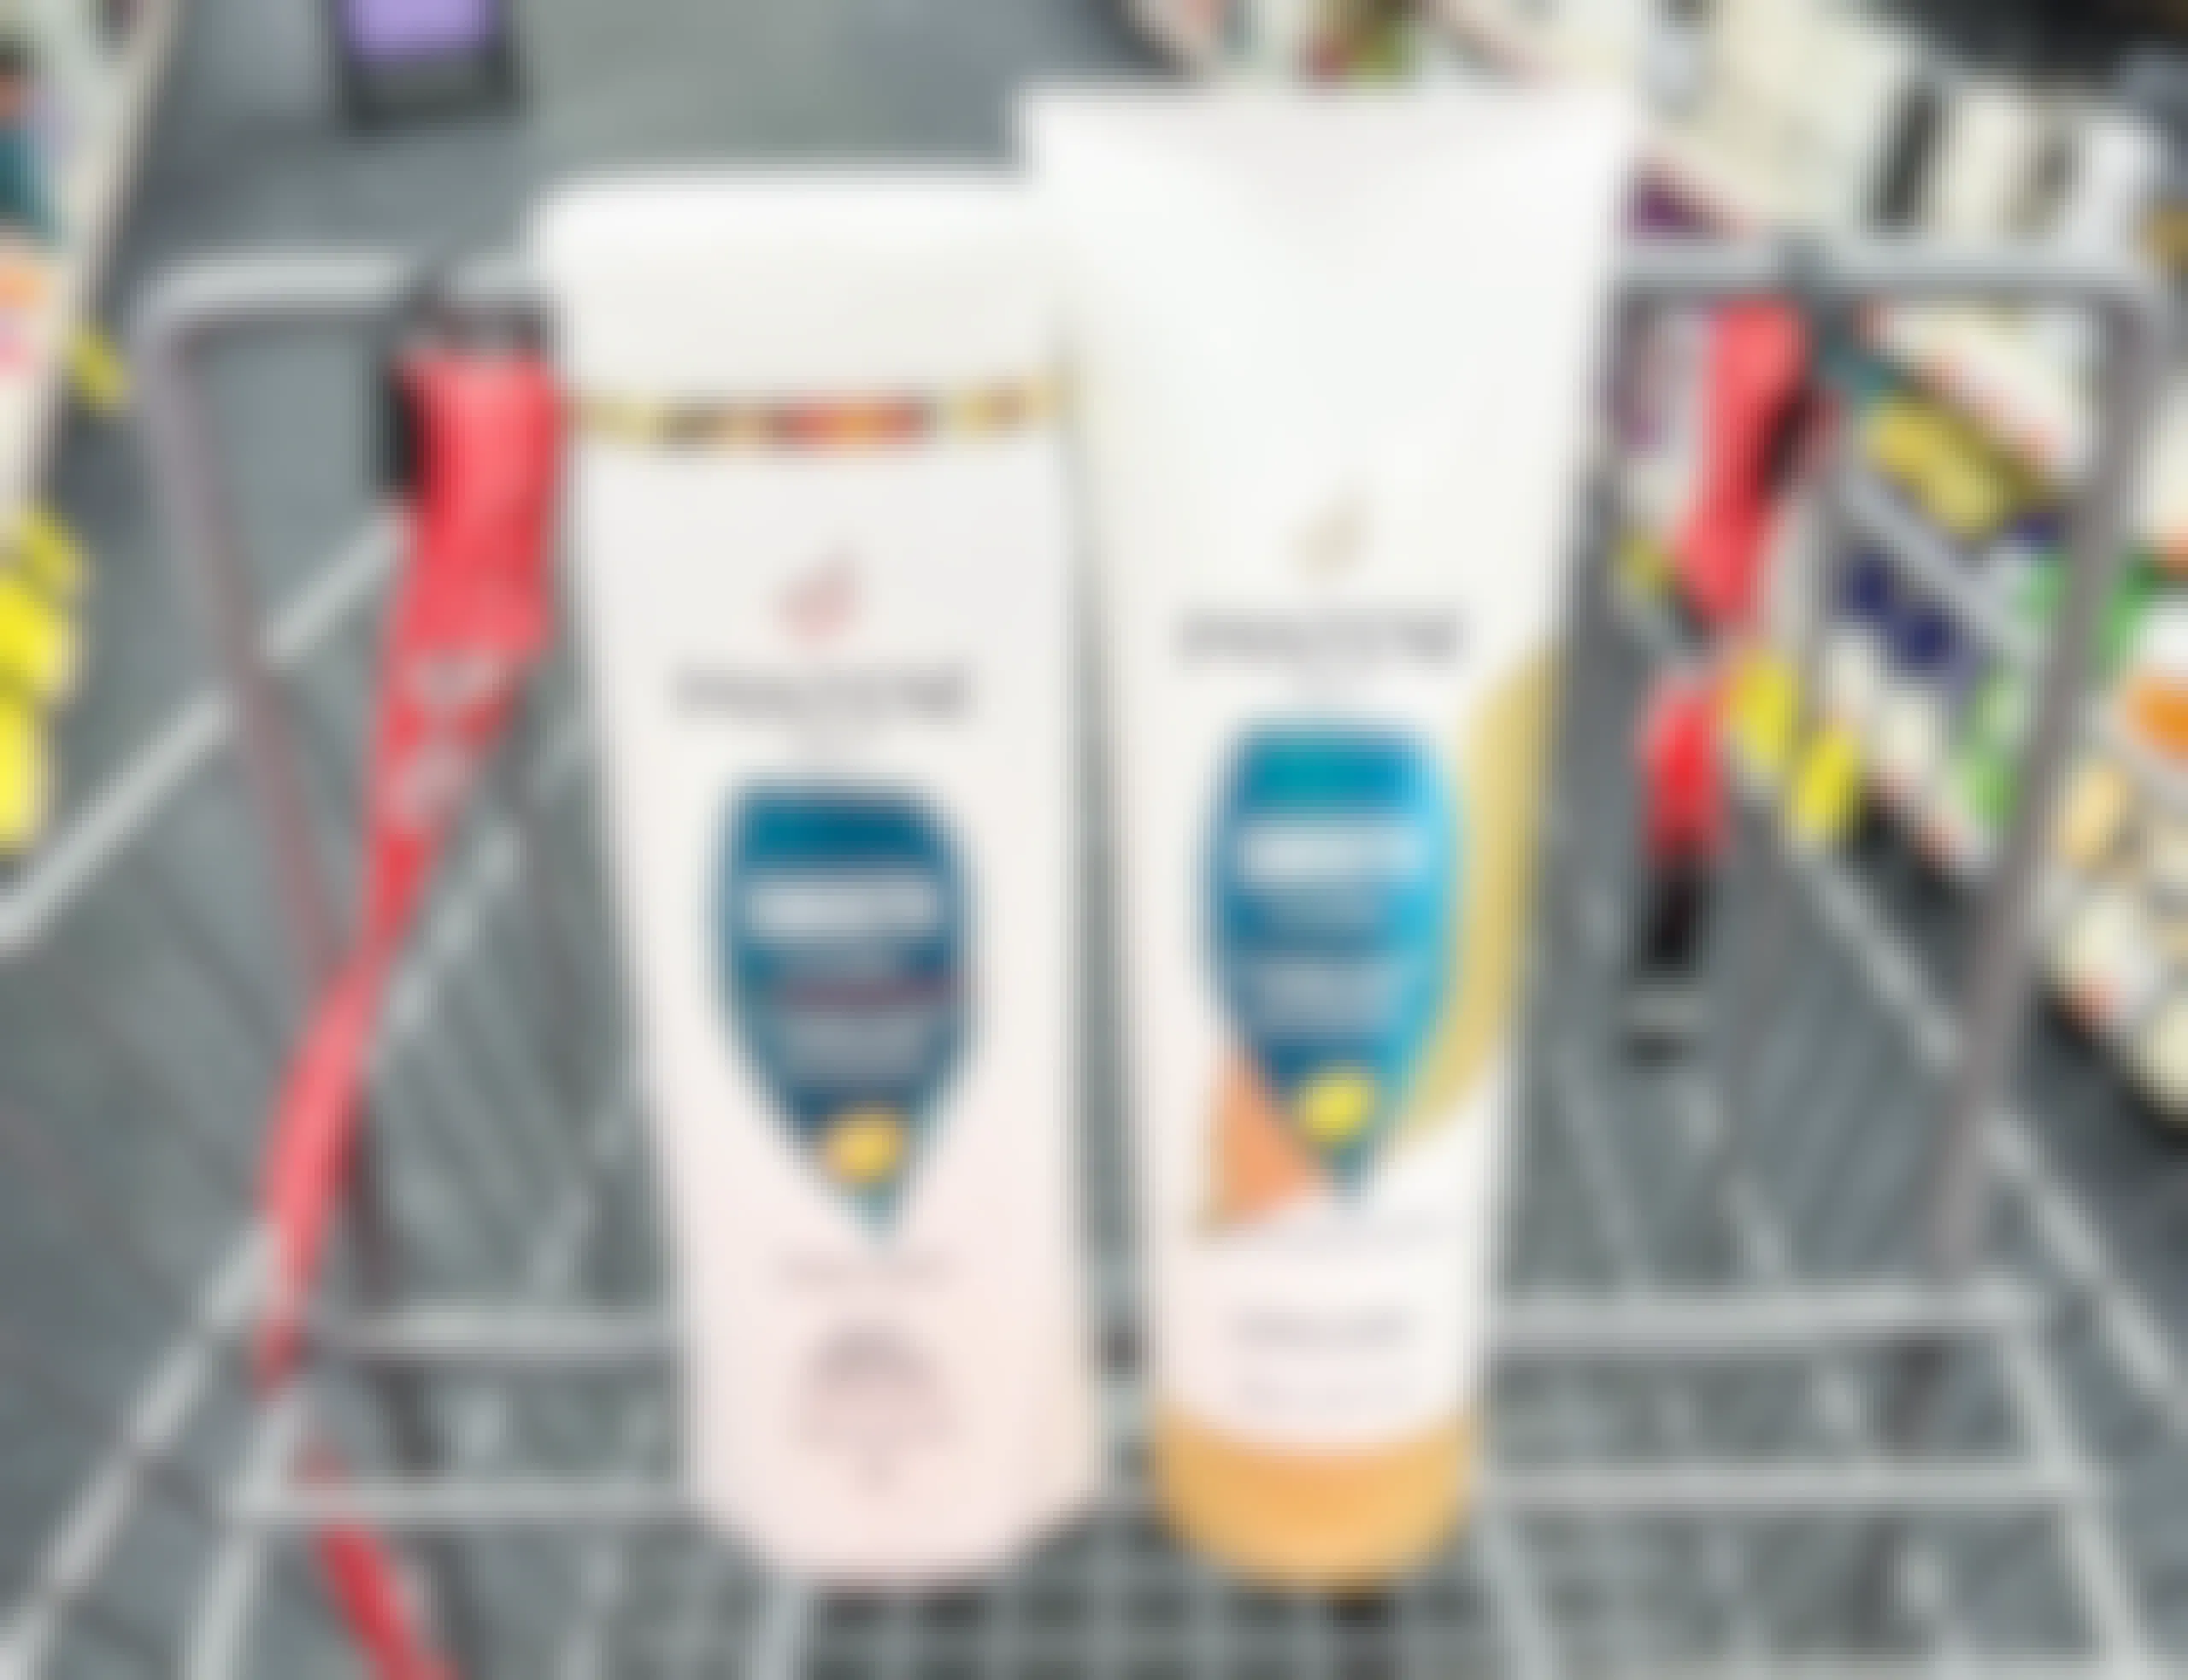 one bottle of Pantene shampoo and conditioner inside shopping cart